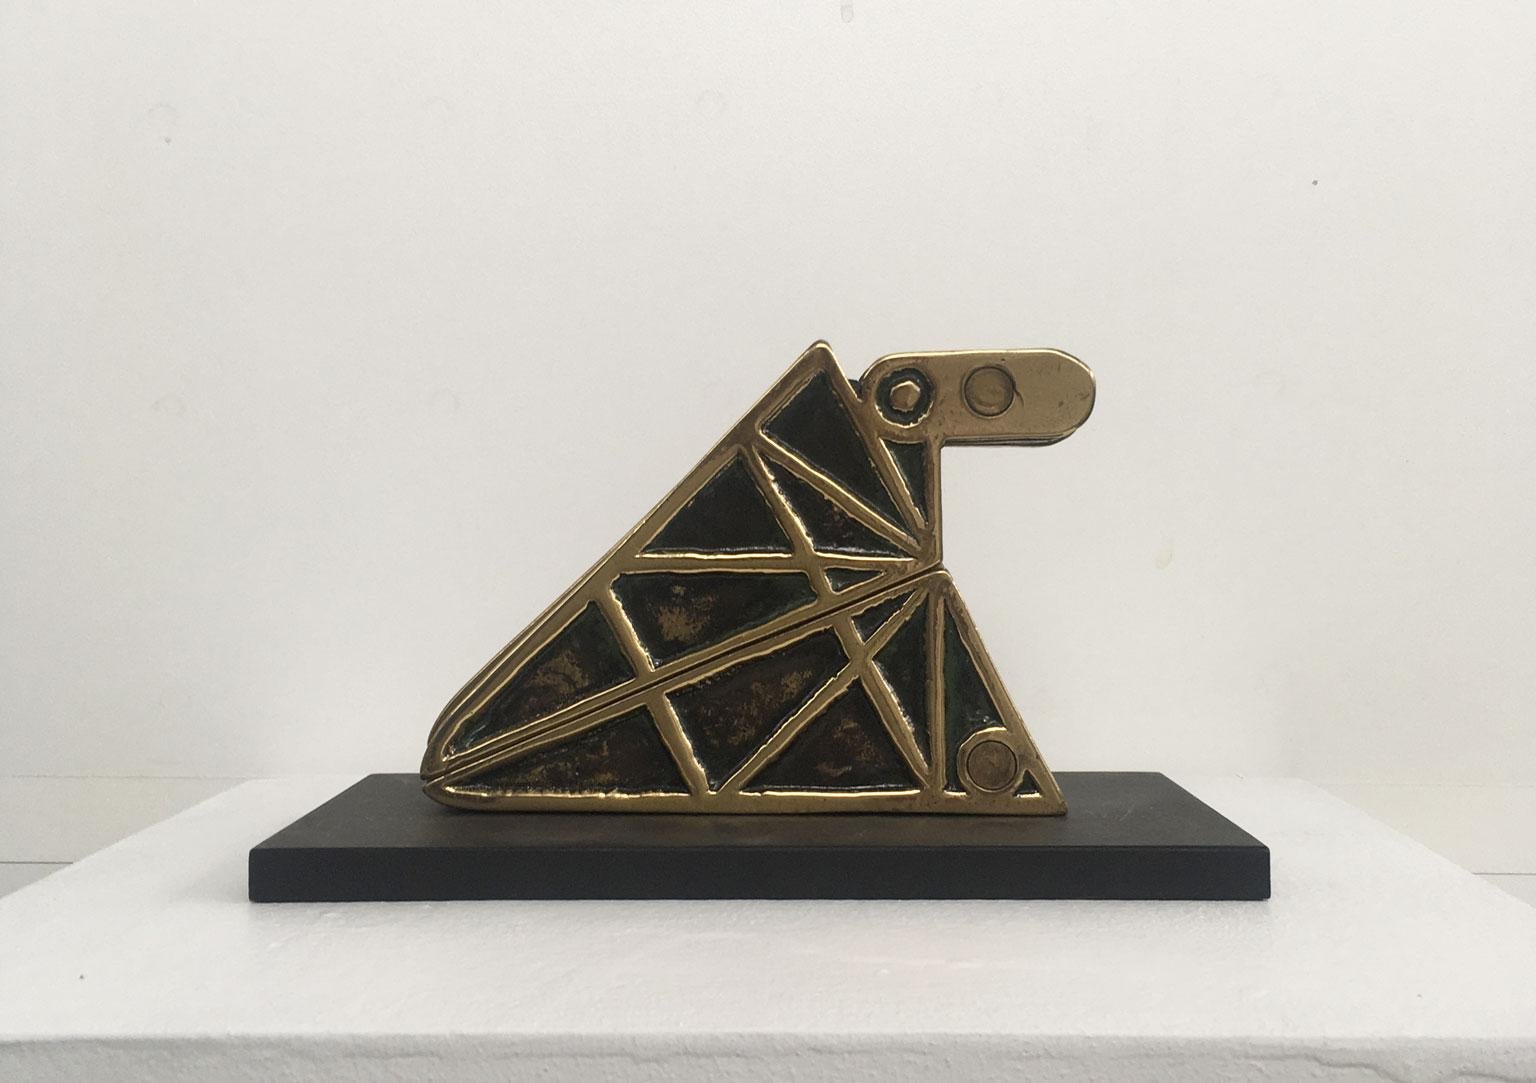 This sculpture is a multiple 1 piece of 1000 realized in 1980 by the well known Italian artist Bruno Chersicla.
All the pieces are numbered and signed by the artist and completed by the Certificate of the artist and the Editor who made the